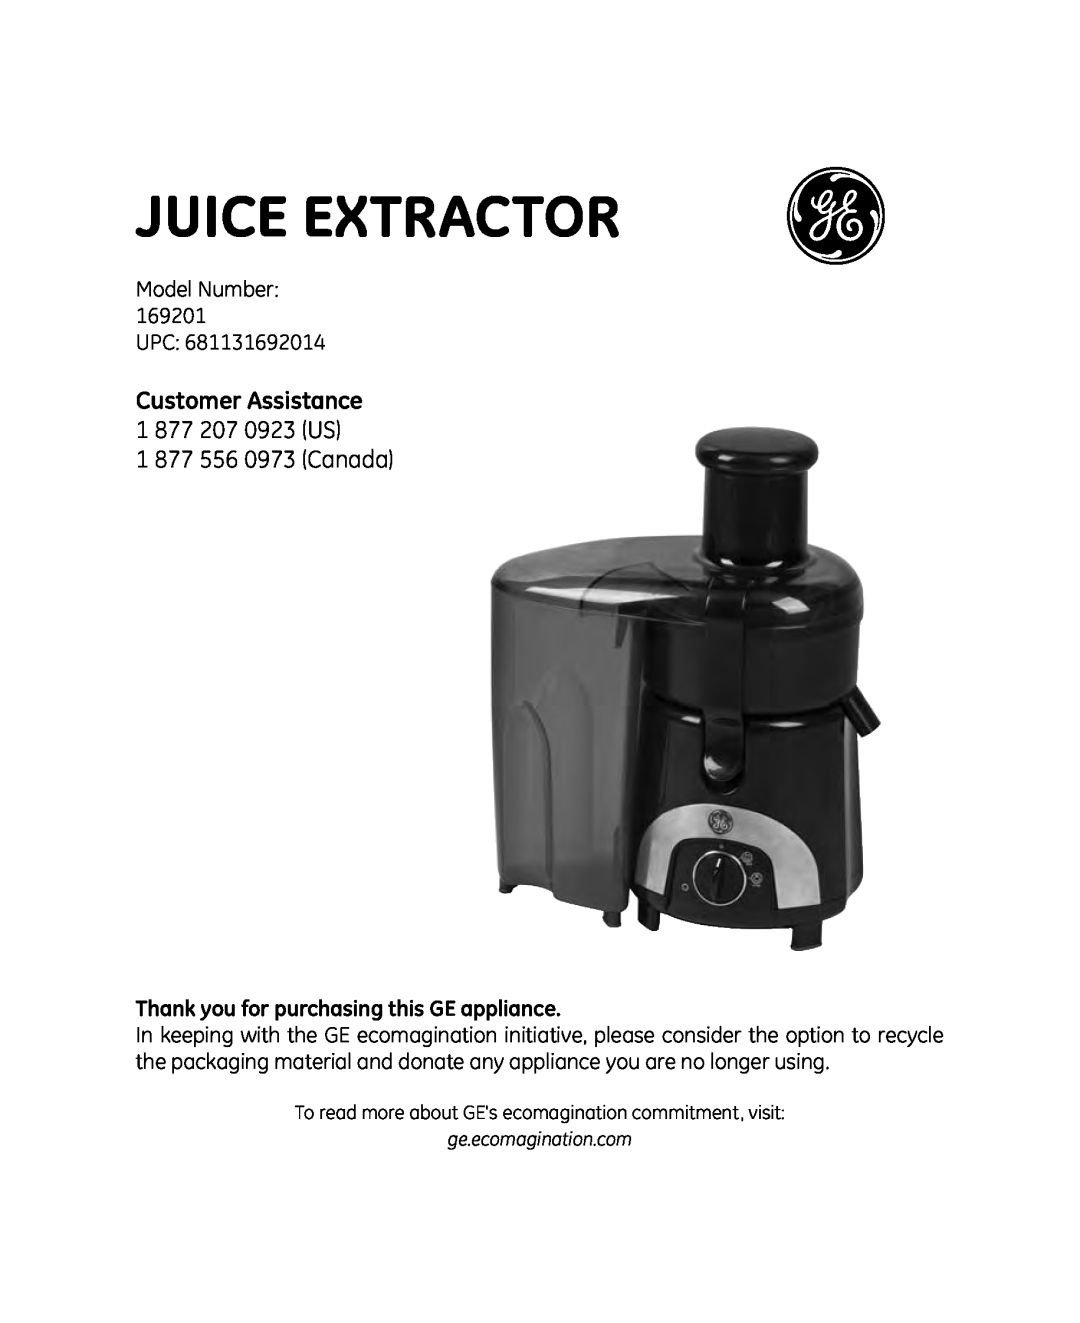 GE 681131692014 manual Customer Assistance 1 877 207 0923 US, Thank you for purchasing this GE appliance, Juice Extractor 